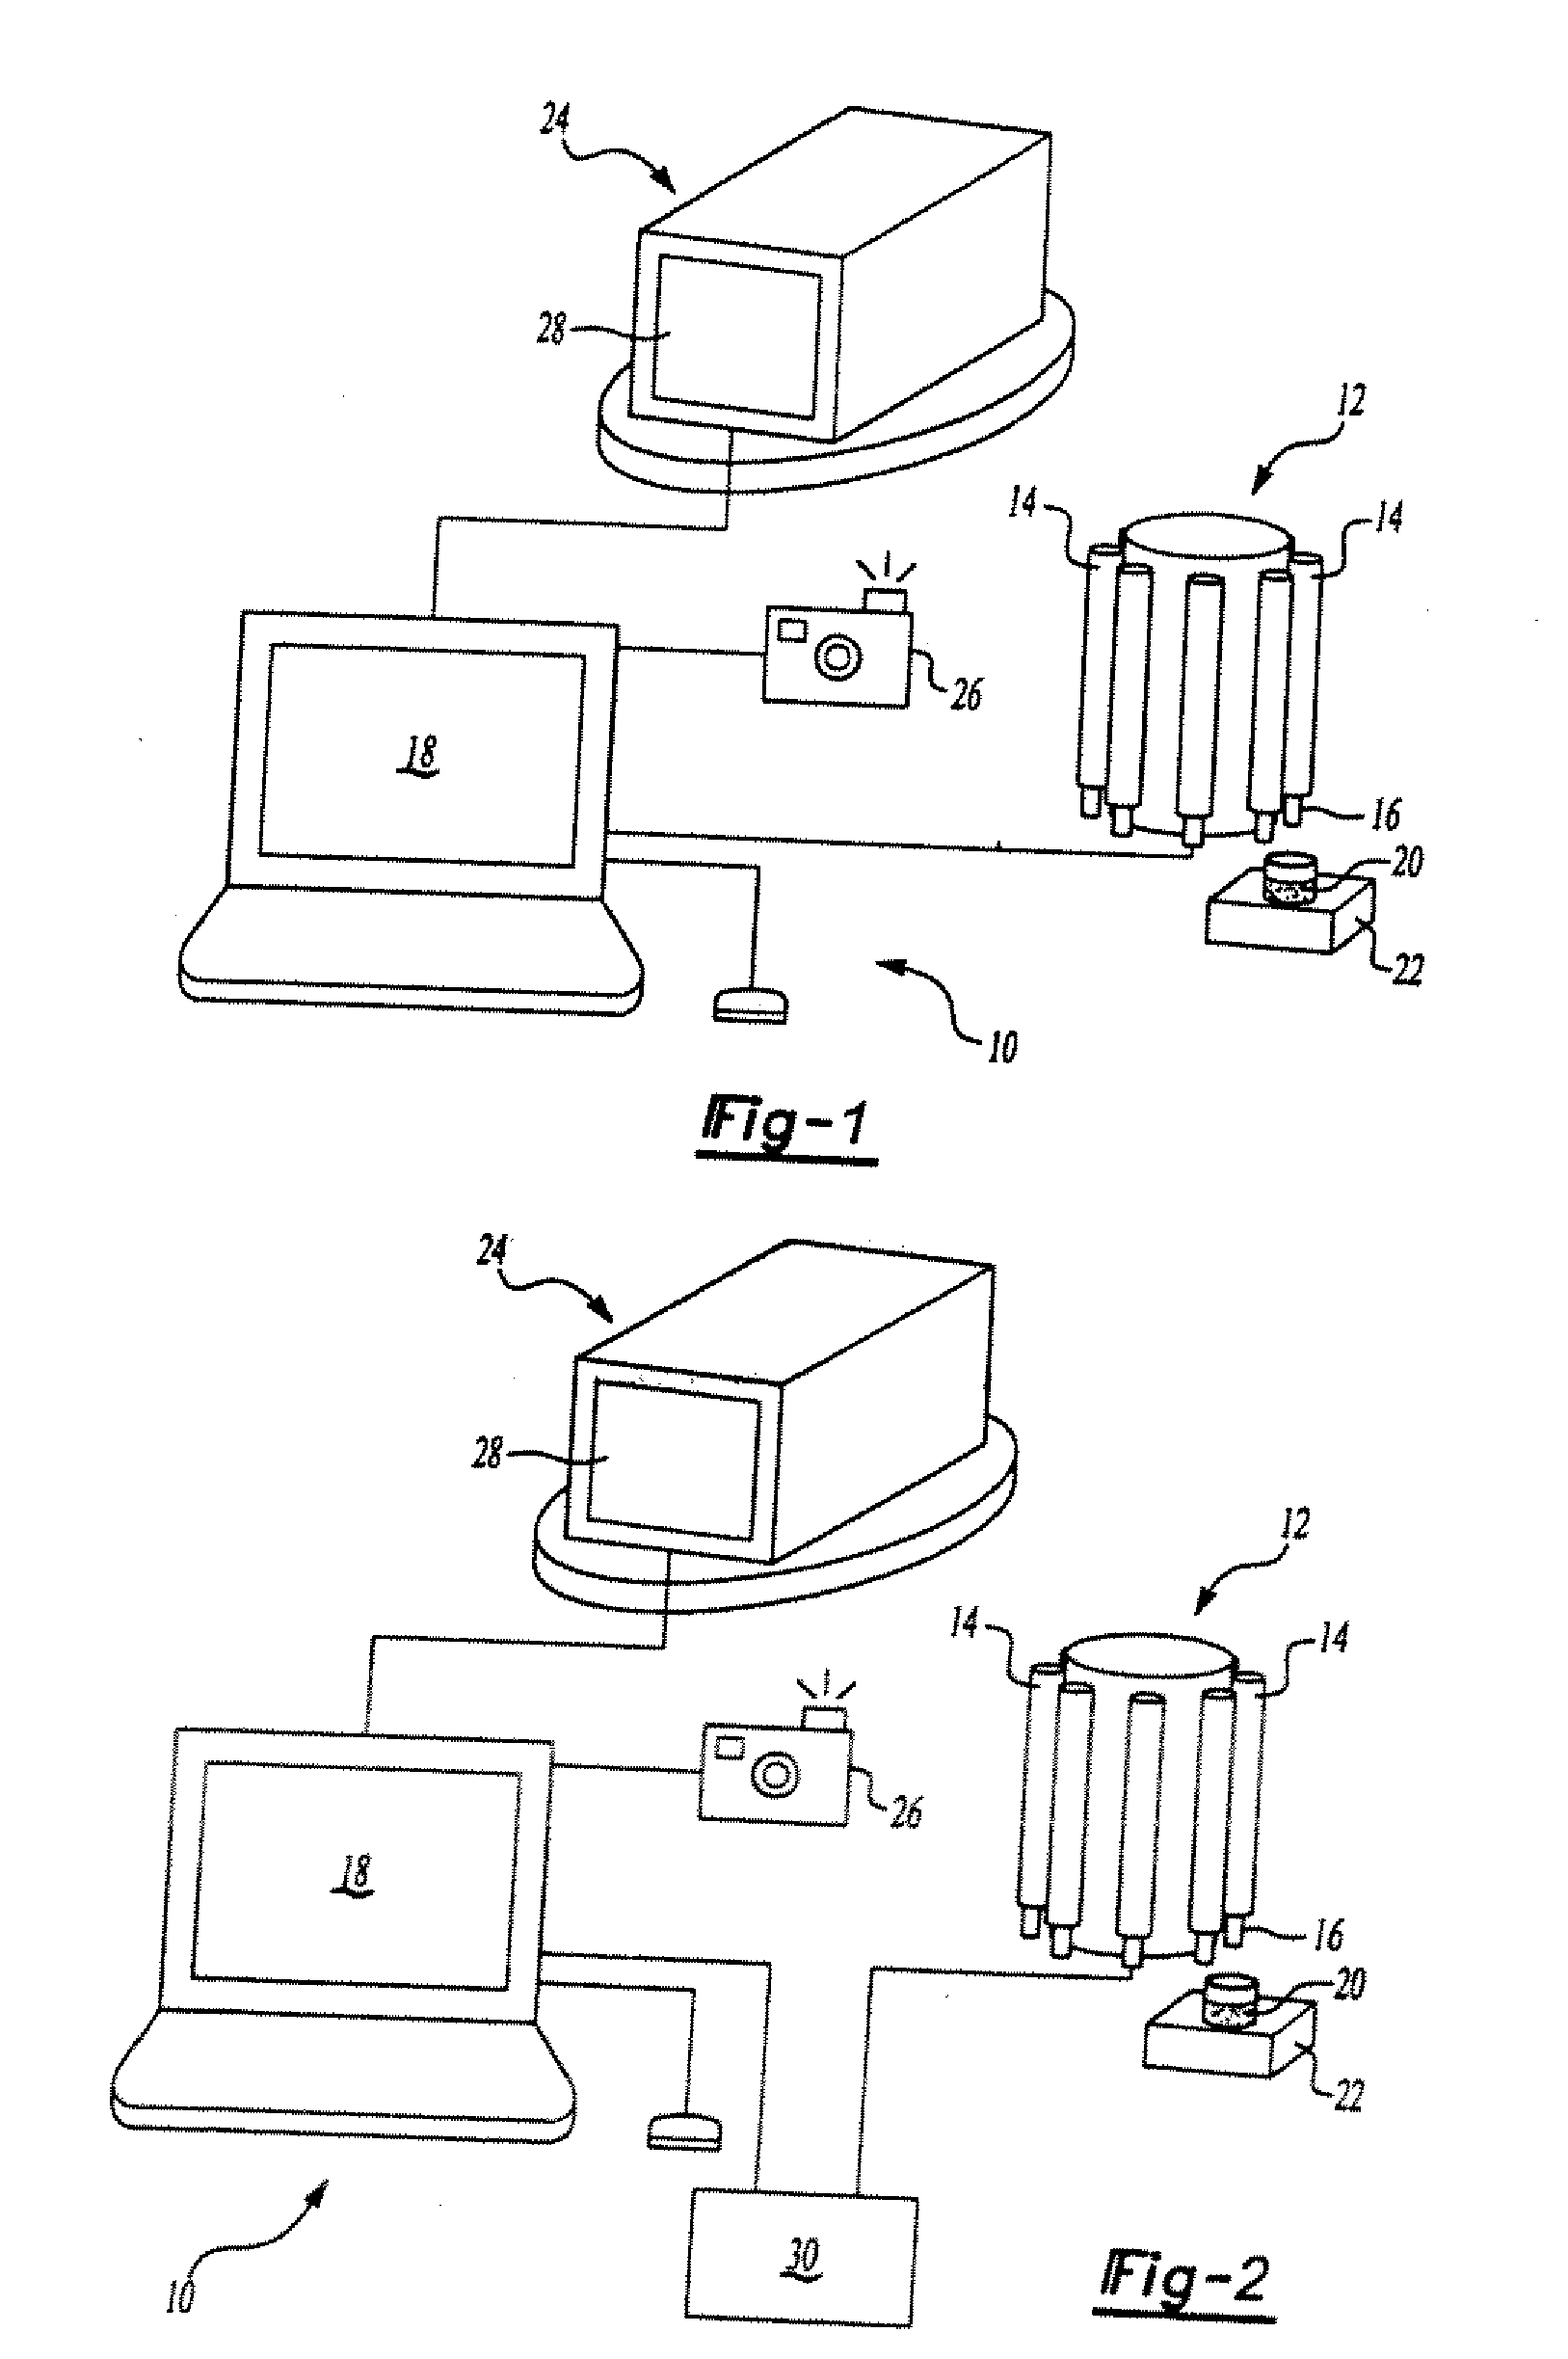 Point-of-sale body powder dispensing system